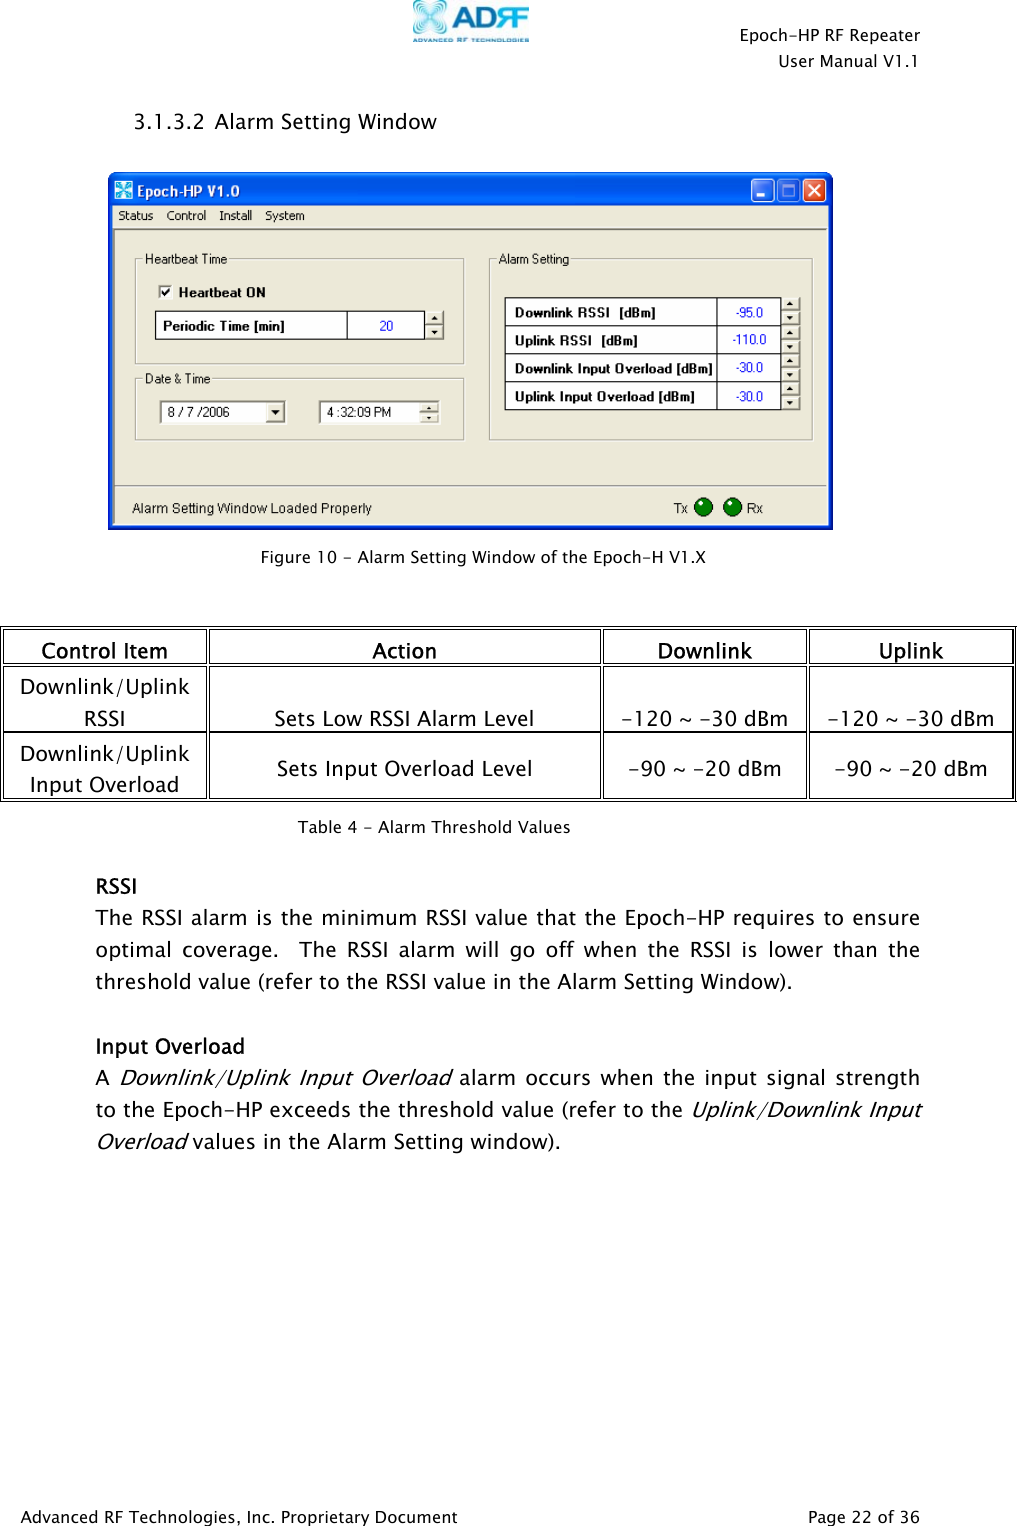    Epoch-HP RF Repeater  User Manual V1.1  Advanced RF Technologies, Inc. Proprietary Document   Page 22 of 36  3.1.3.2  Alarm Setting Window      Control Item  Action Downlink Uplink Downlink/Uplink RSSI  Sets Low RSSI Alarm Level  -120 ~ -30 dBm  -120 ~ -30 dBm Downlink/Uplink Input Overload  Sets Input Overload Level  -90 ~ -20 dBm  -90 ~ -20 dBm   RSSI The RSSI alarm is the minimum RSSI value that the Epoch-HP requires to ensure optimal coverage.  The RSSI alarm will go off when the RSSI is lower than the threshold value (refer to the RSSI value in the Alarm Setting Window).      Input Overload A Downlink/Uplink Input Overload alarm occurs when the input signal strength to the Epoch-HP exceeds the threshold value (refer to the Uplink/Downlink Input Overload values in the Alarm Setting window).          Figure 10 - Alarm Setting Window of the Epoch-H V1.XTable 4 - Alarm Threshold Values 